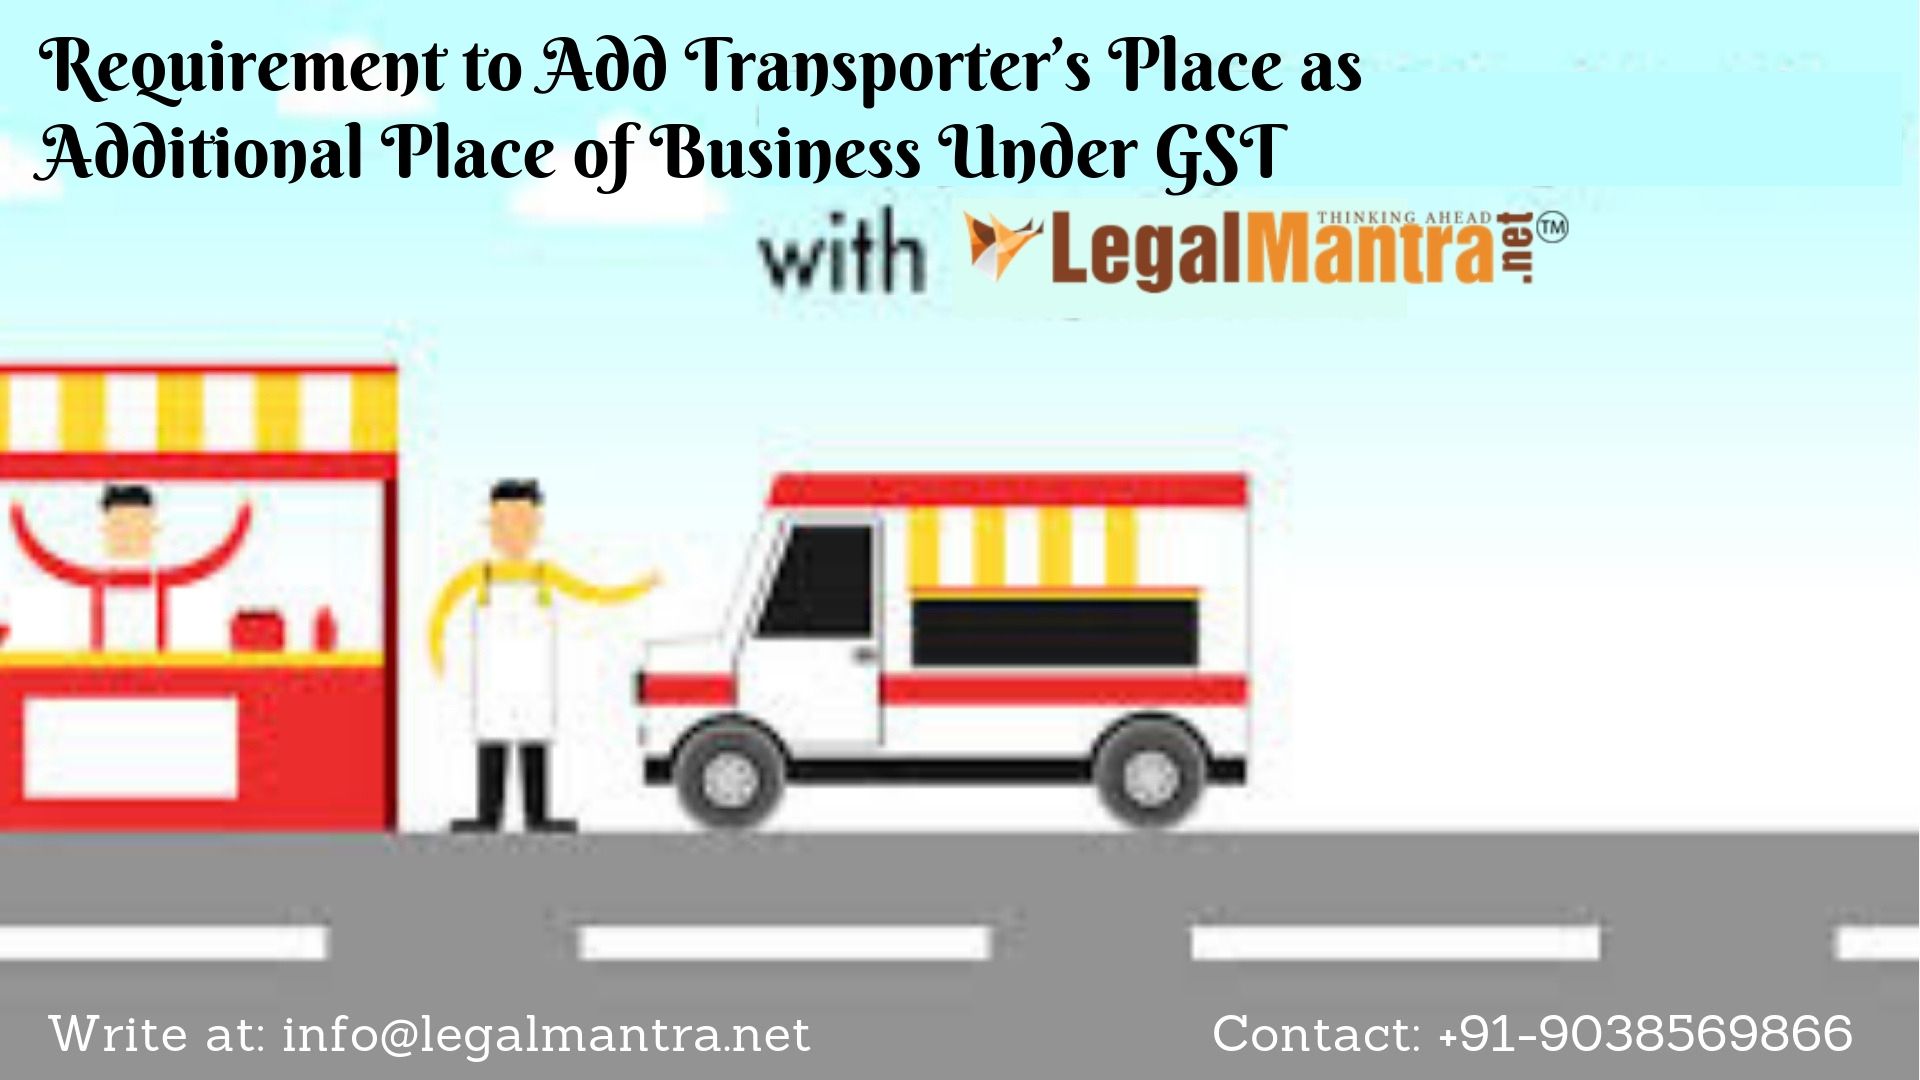 Requirement to Add Transport’s Place as Additional Place of Business Under GST